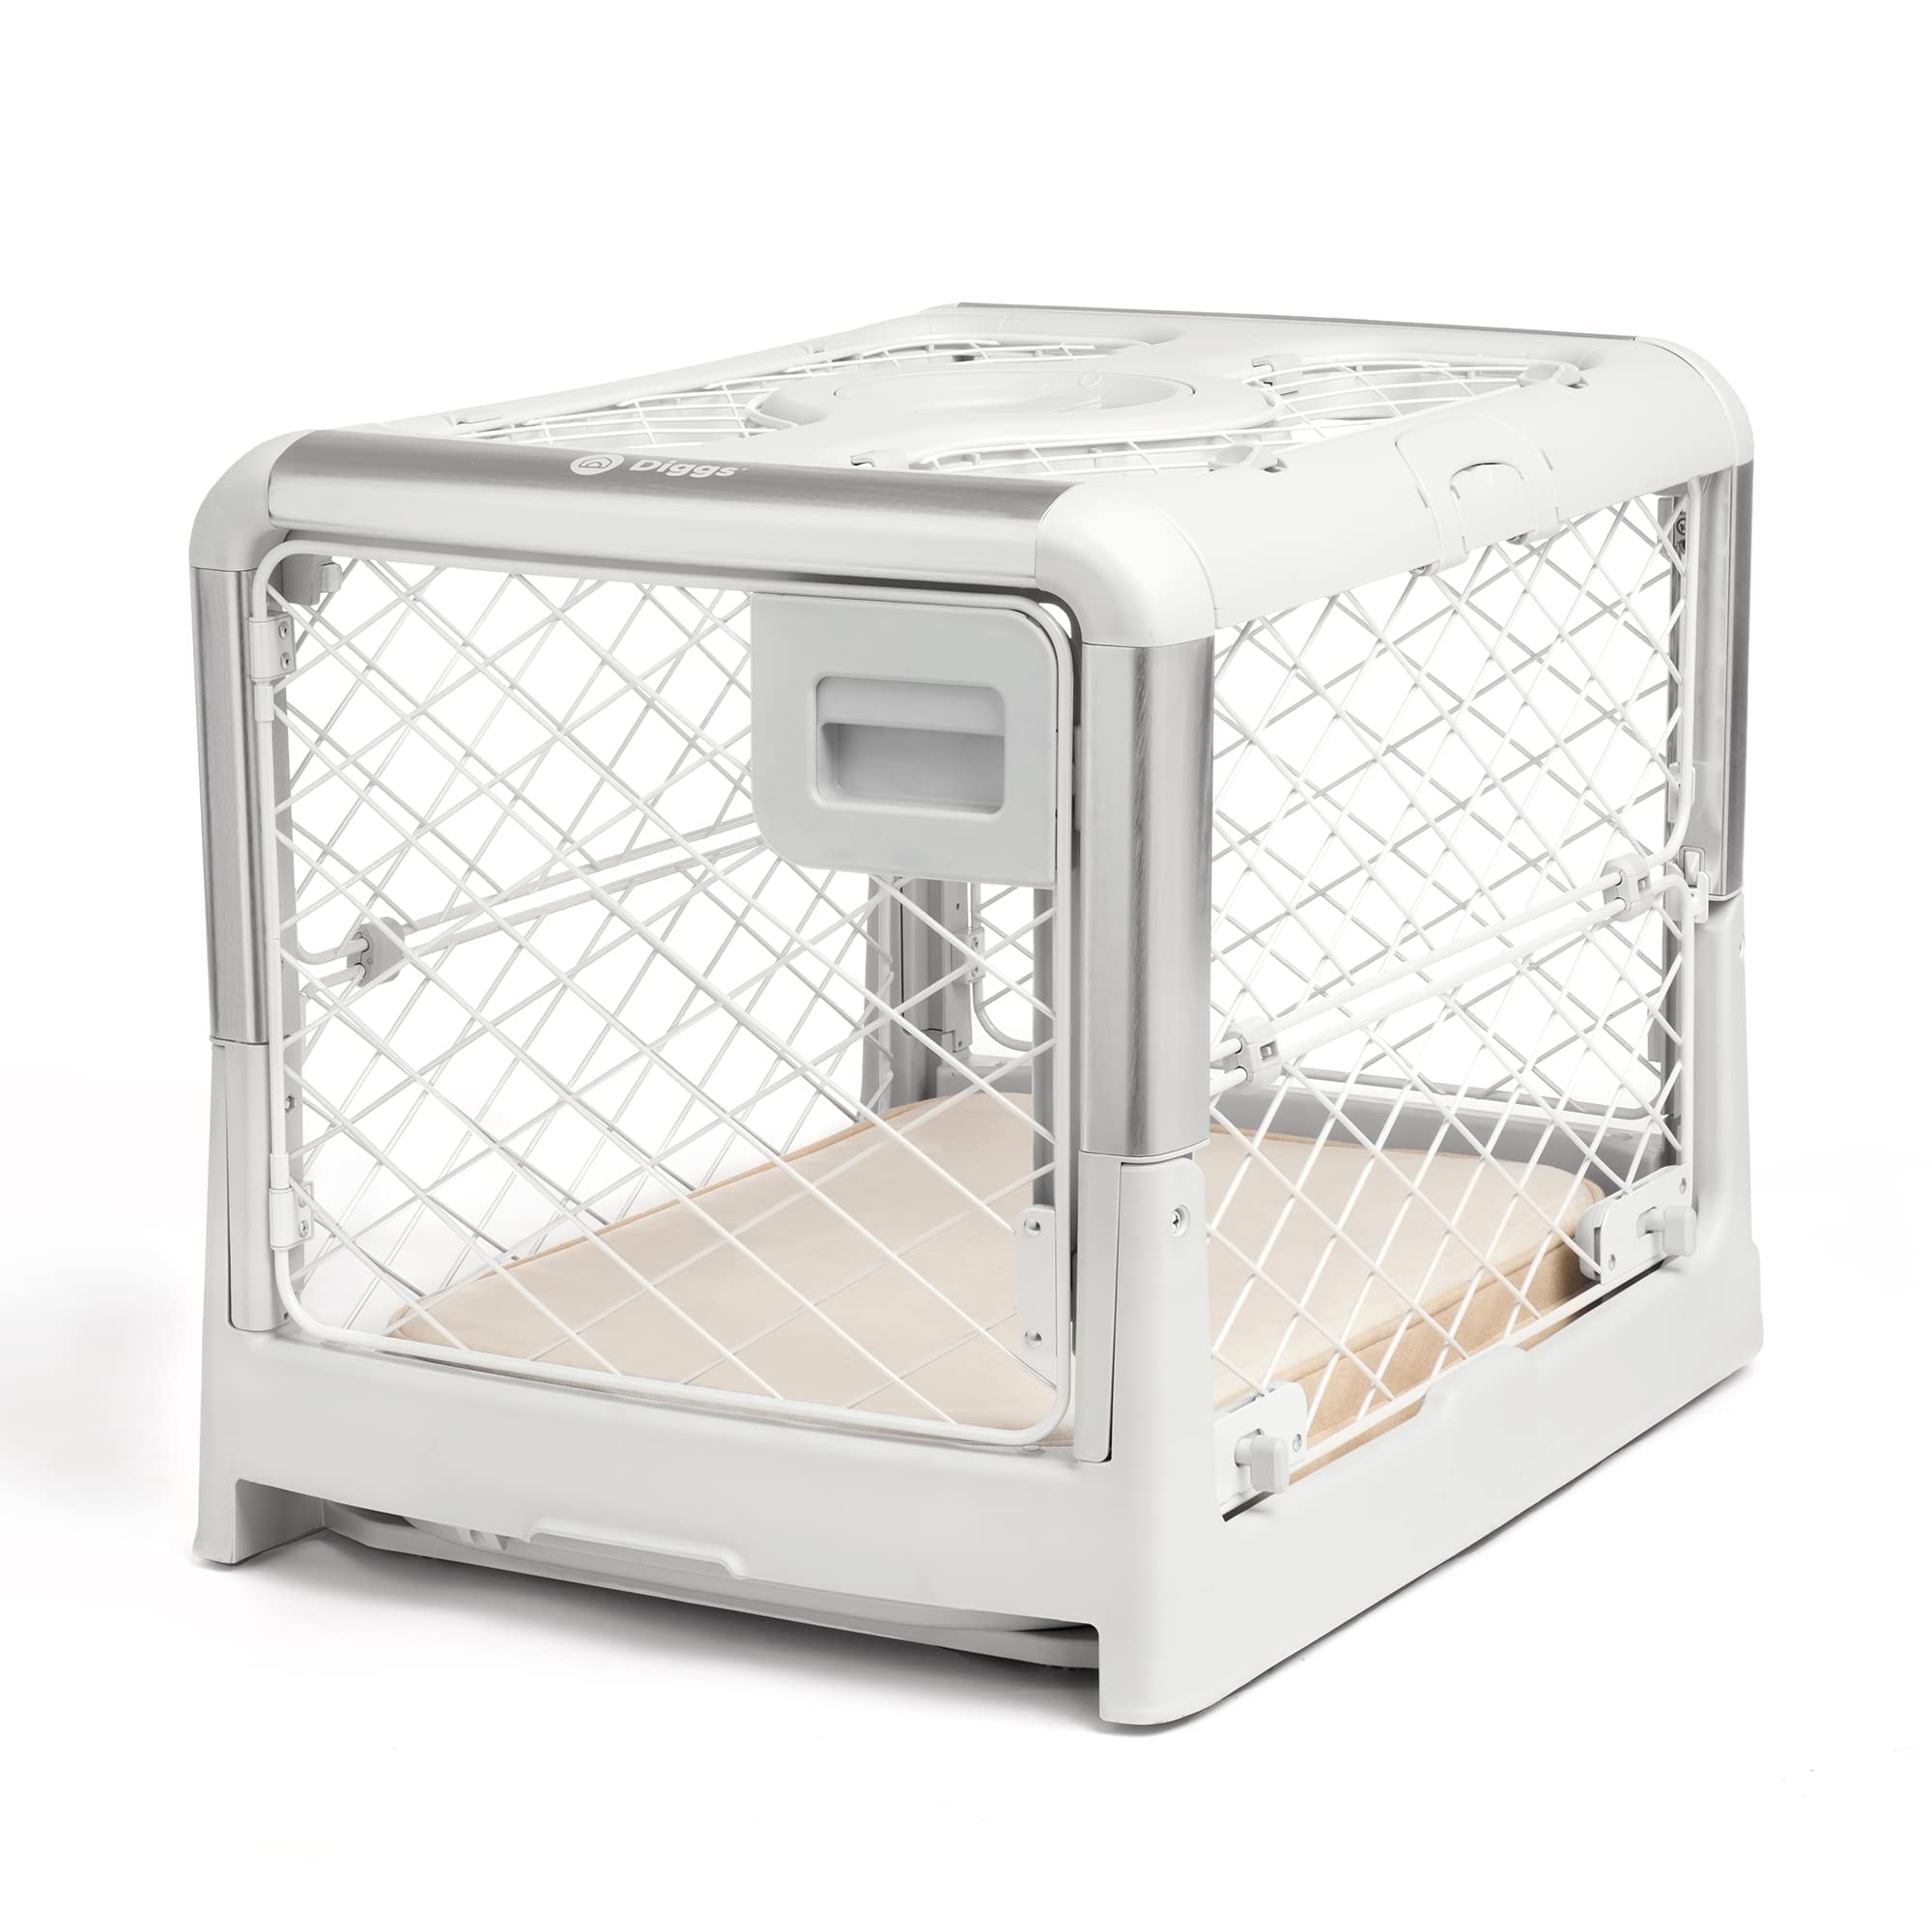 Diggs Revol Dog crate (collapsible crate, Portable Travel Kennel) for Medium Dogs and Puppies (Ash)